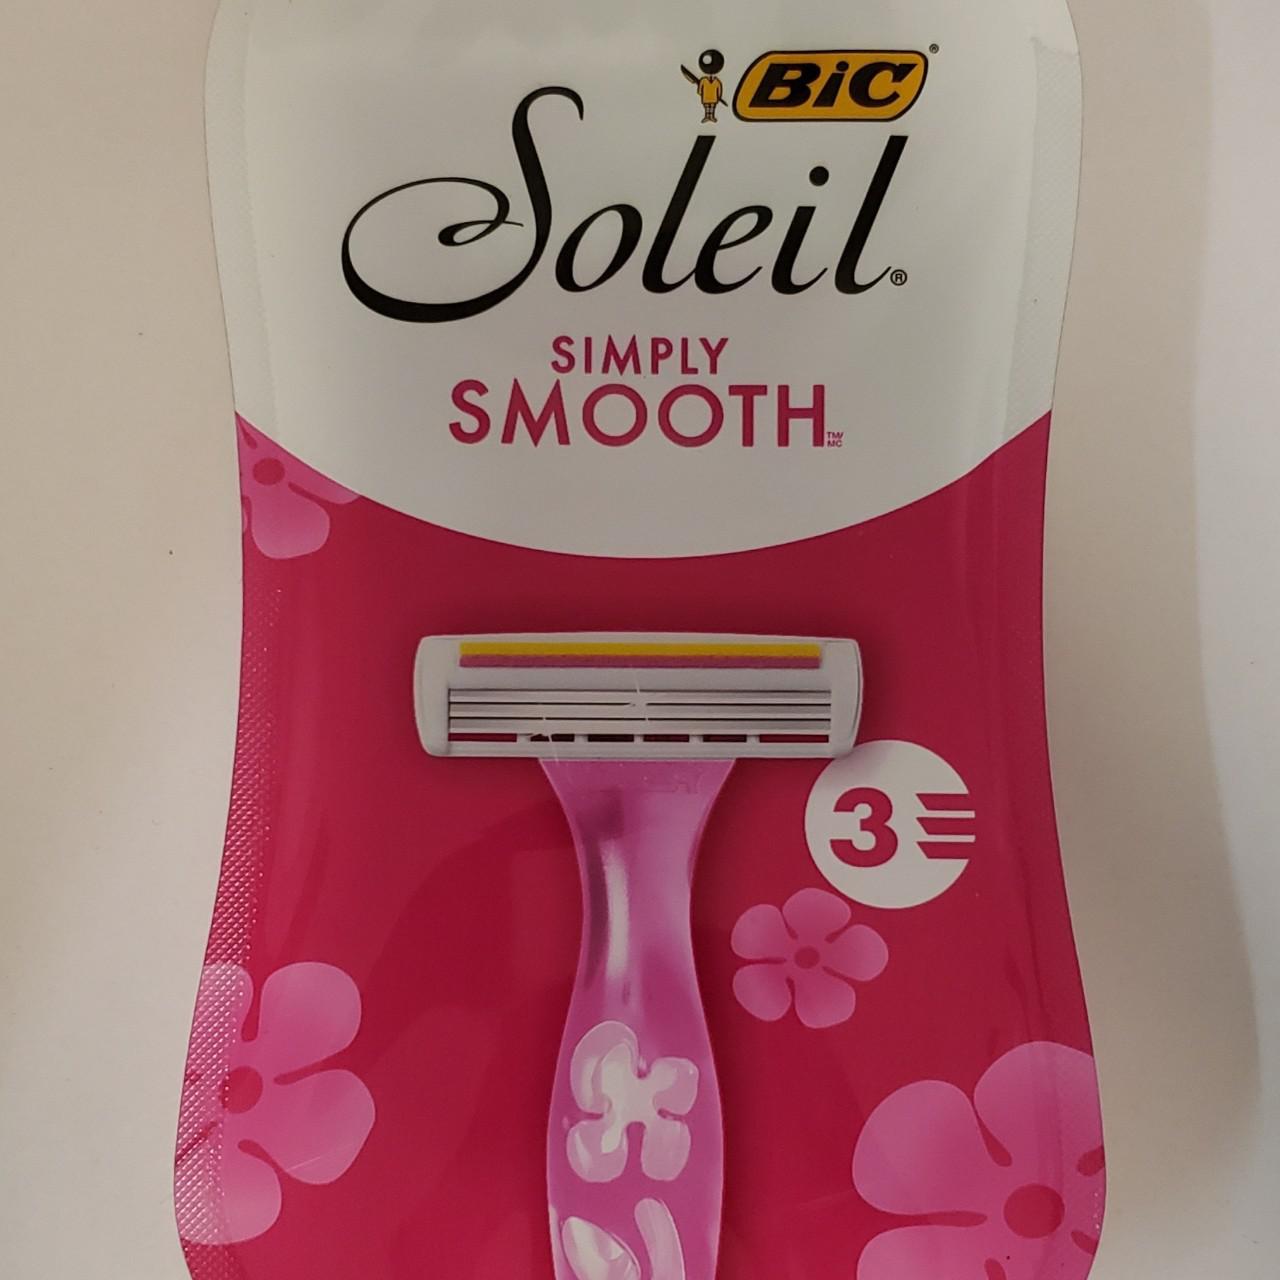 Product Image 1 - (2) Two Packages Bic Soleil